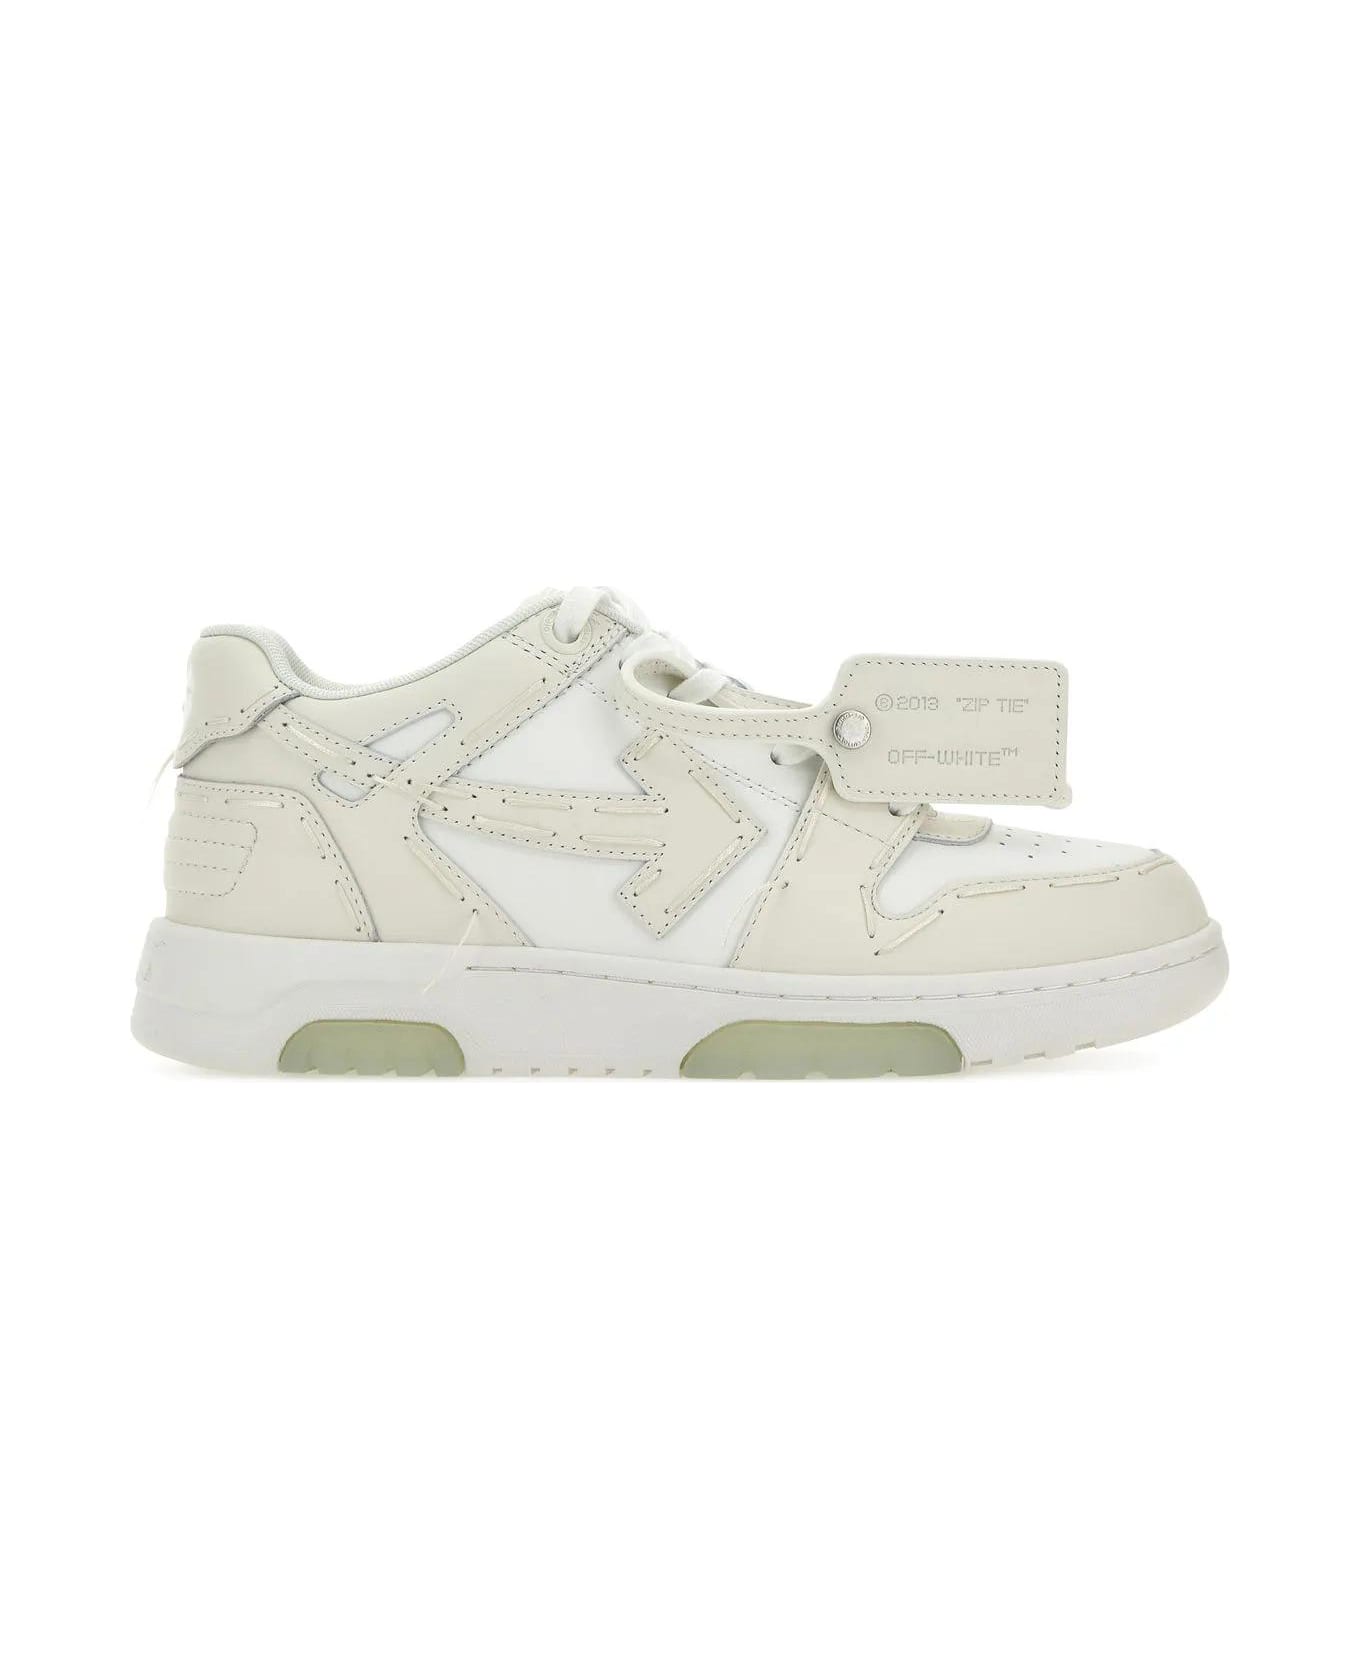 Off-White Two-tone Leather Out Of Office Sneakers - Bianco